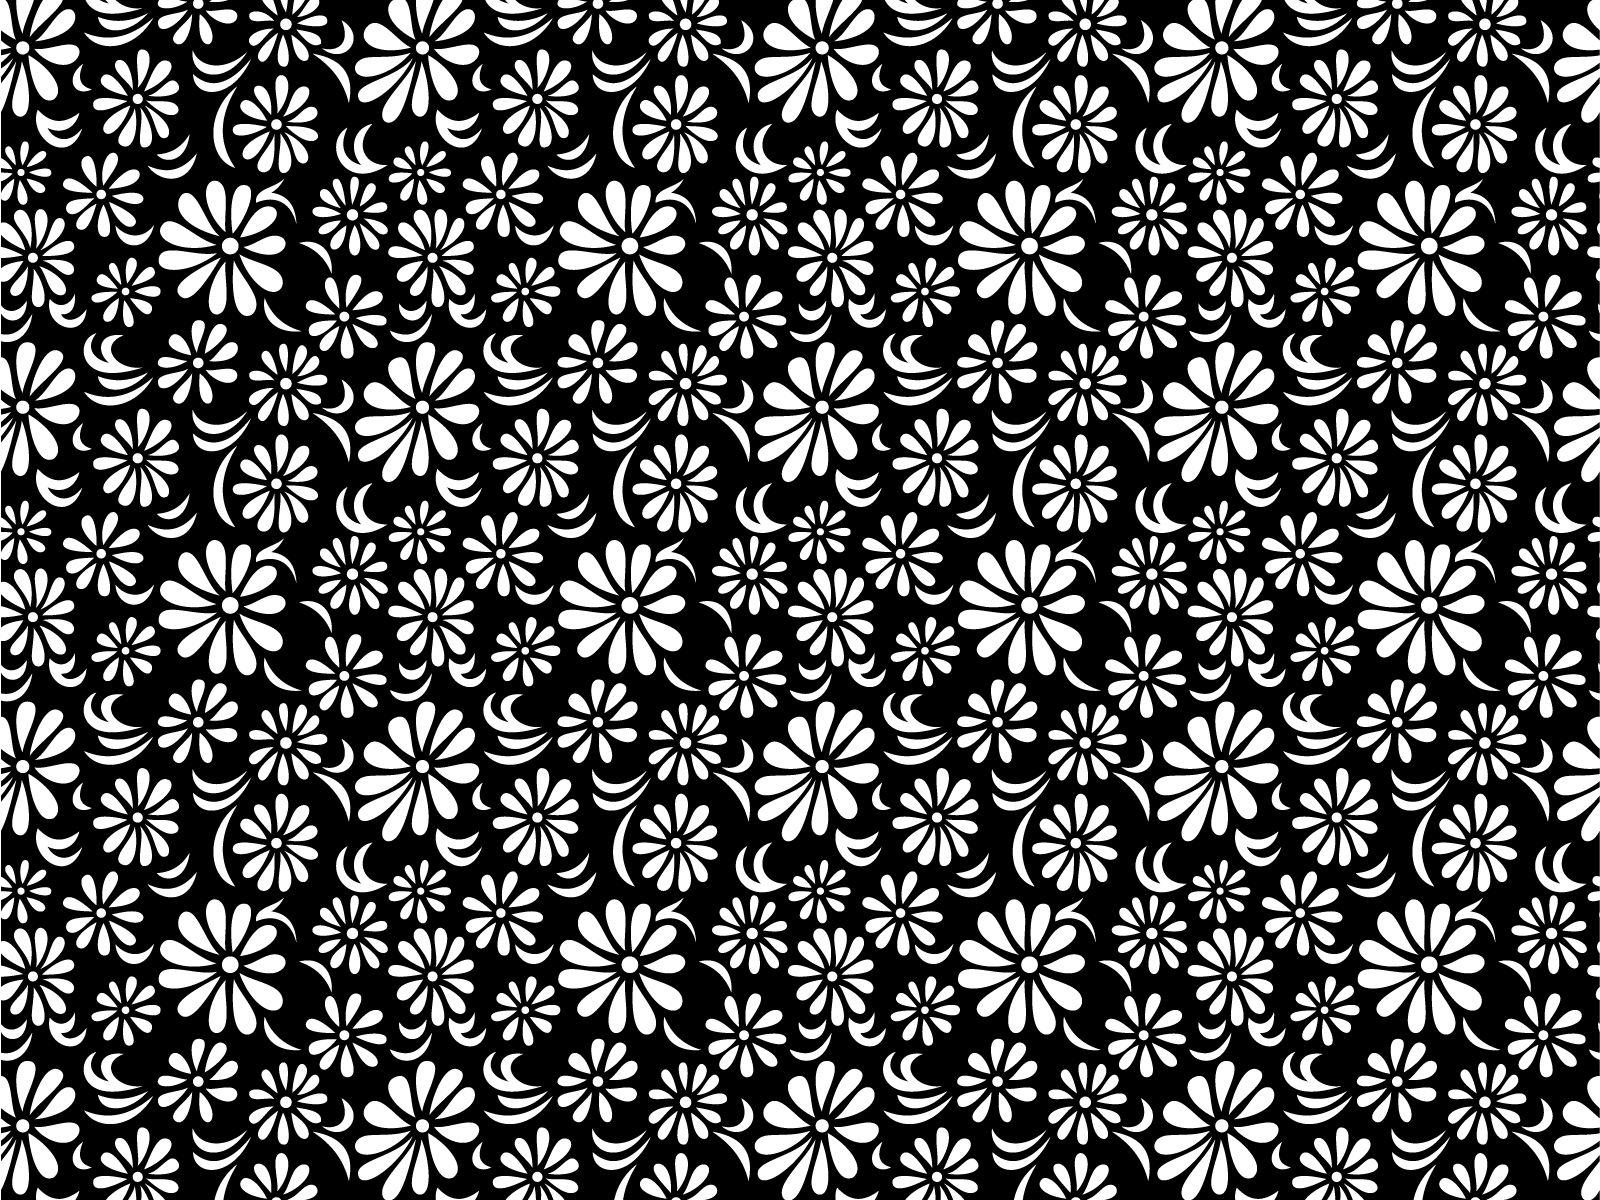 Black and White Floral Wallpaper Desktop #h752080. Abstract HD